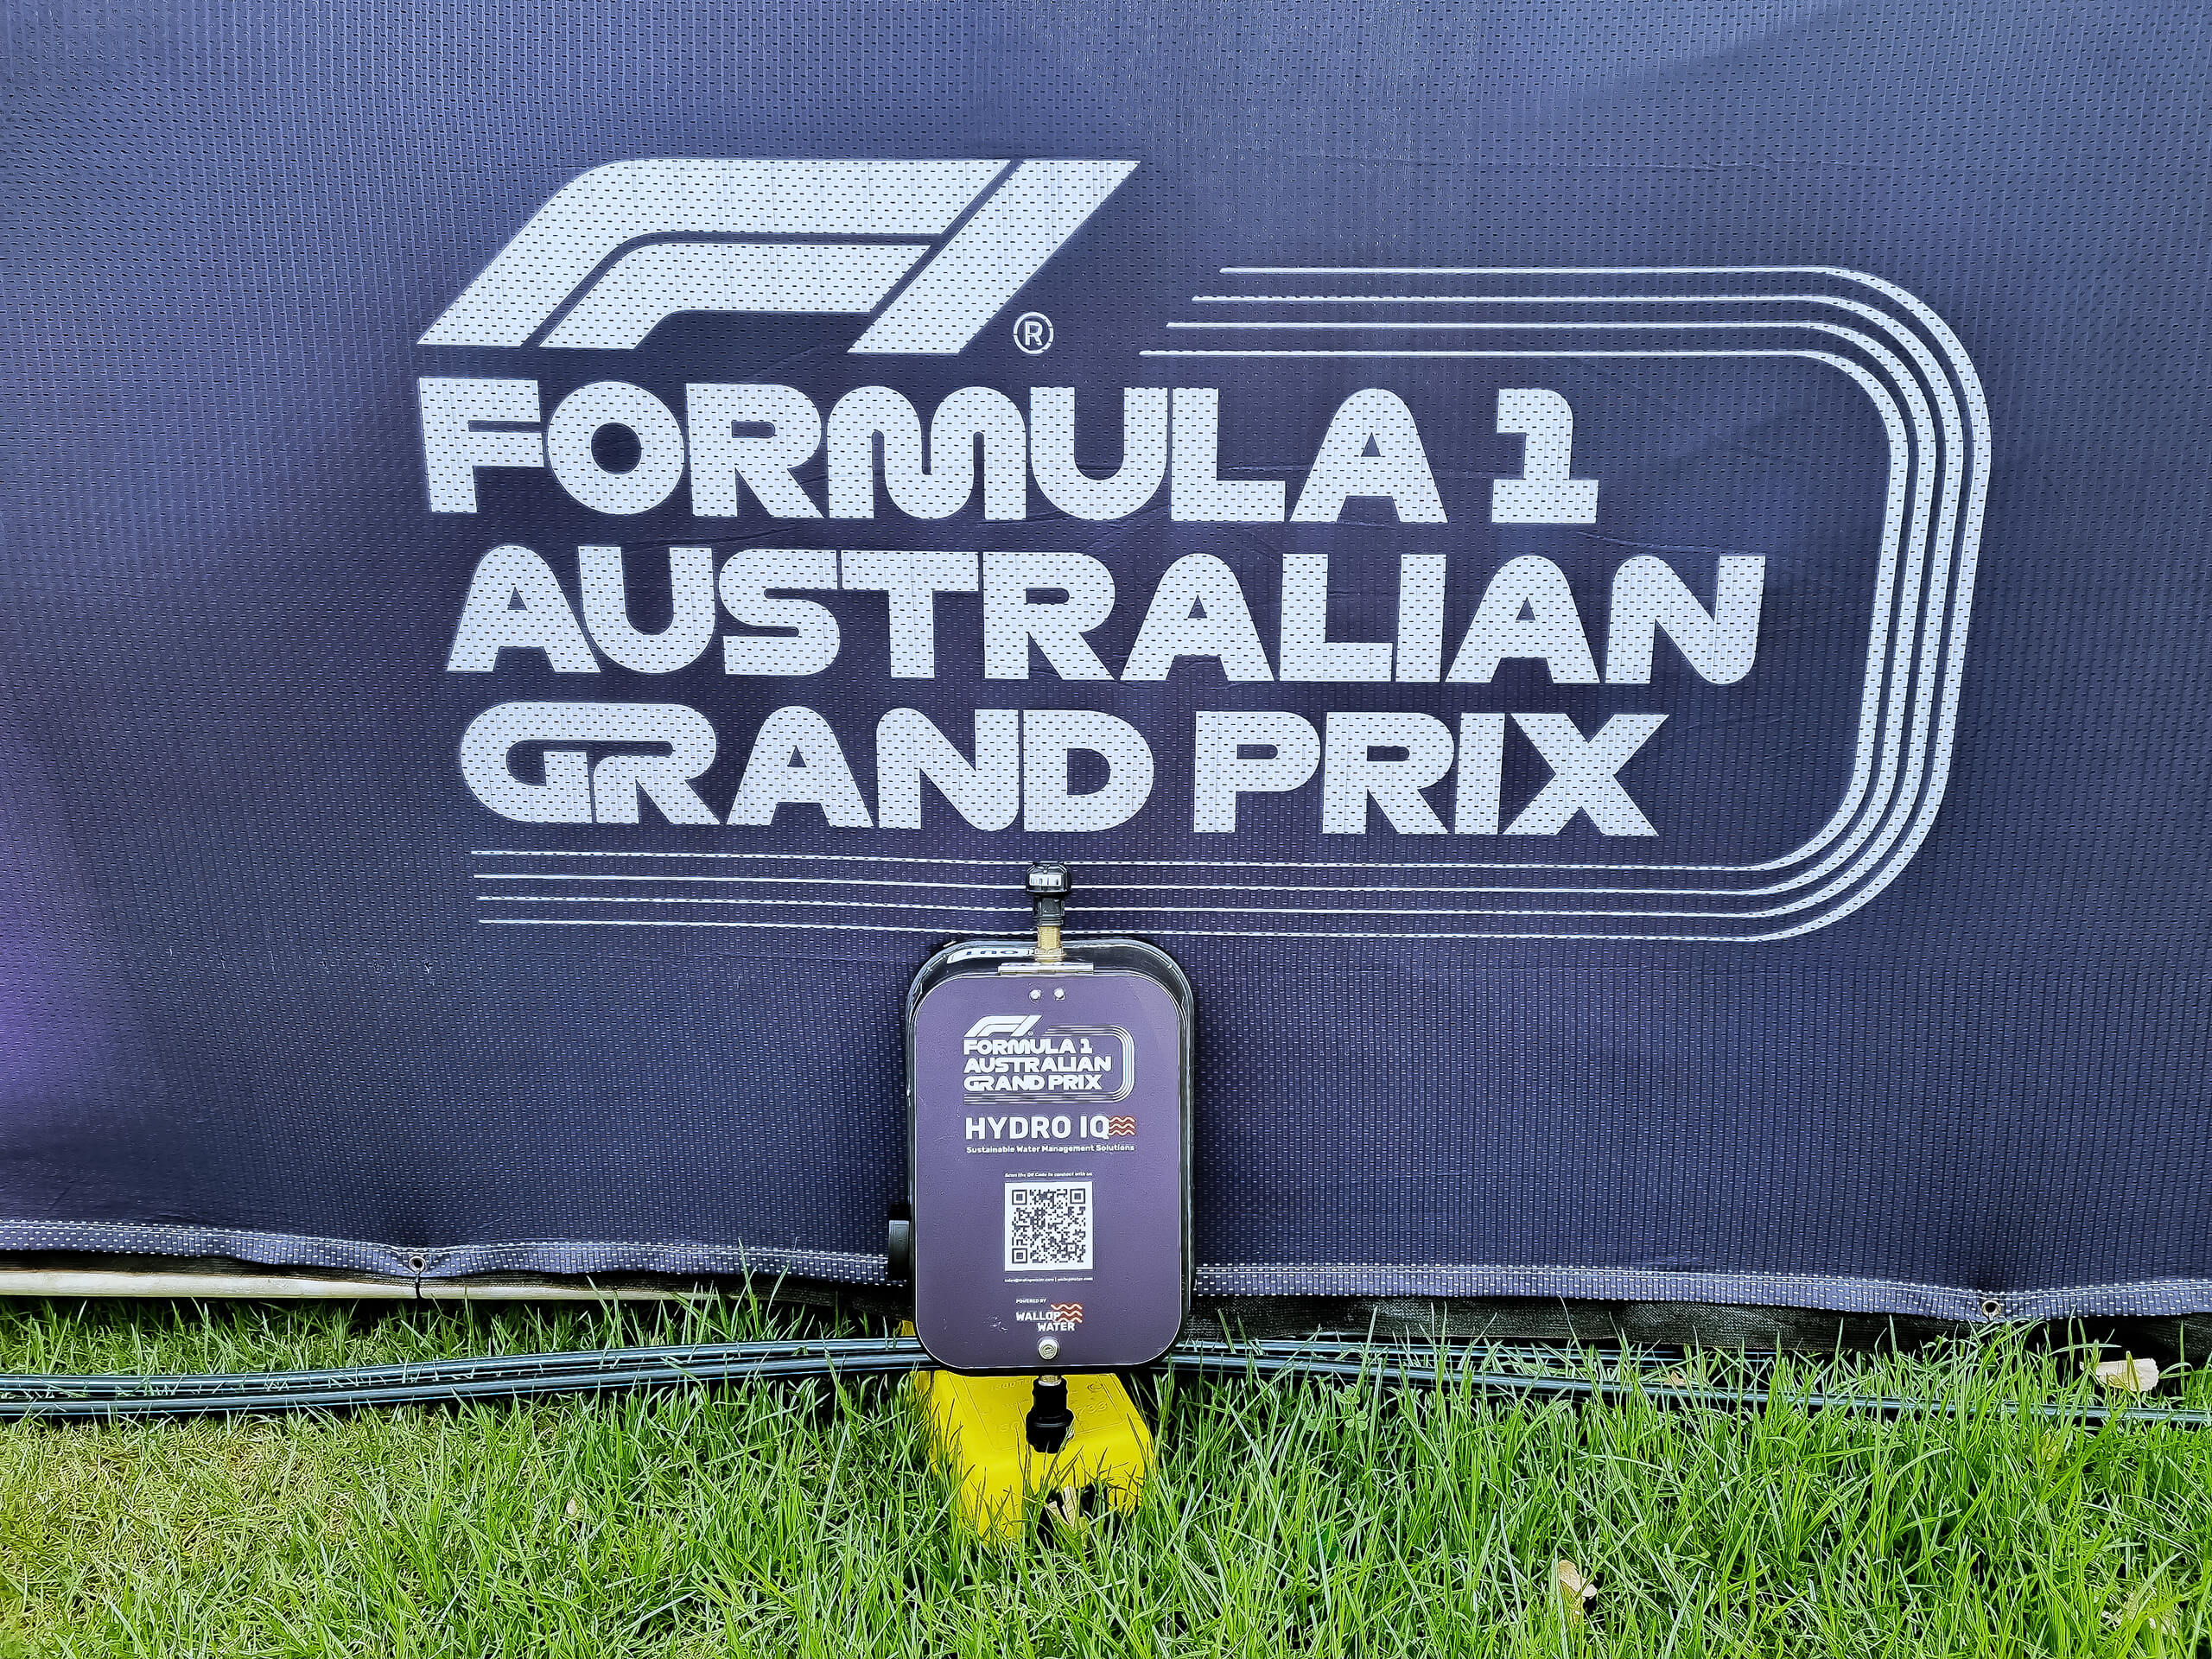 Hydro IQ technology, an innovative solution that provides real-time monitoring of water usage across the venue for 2024 Australian F1 Grand Prix